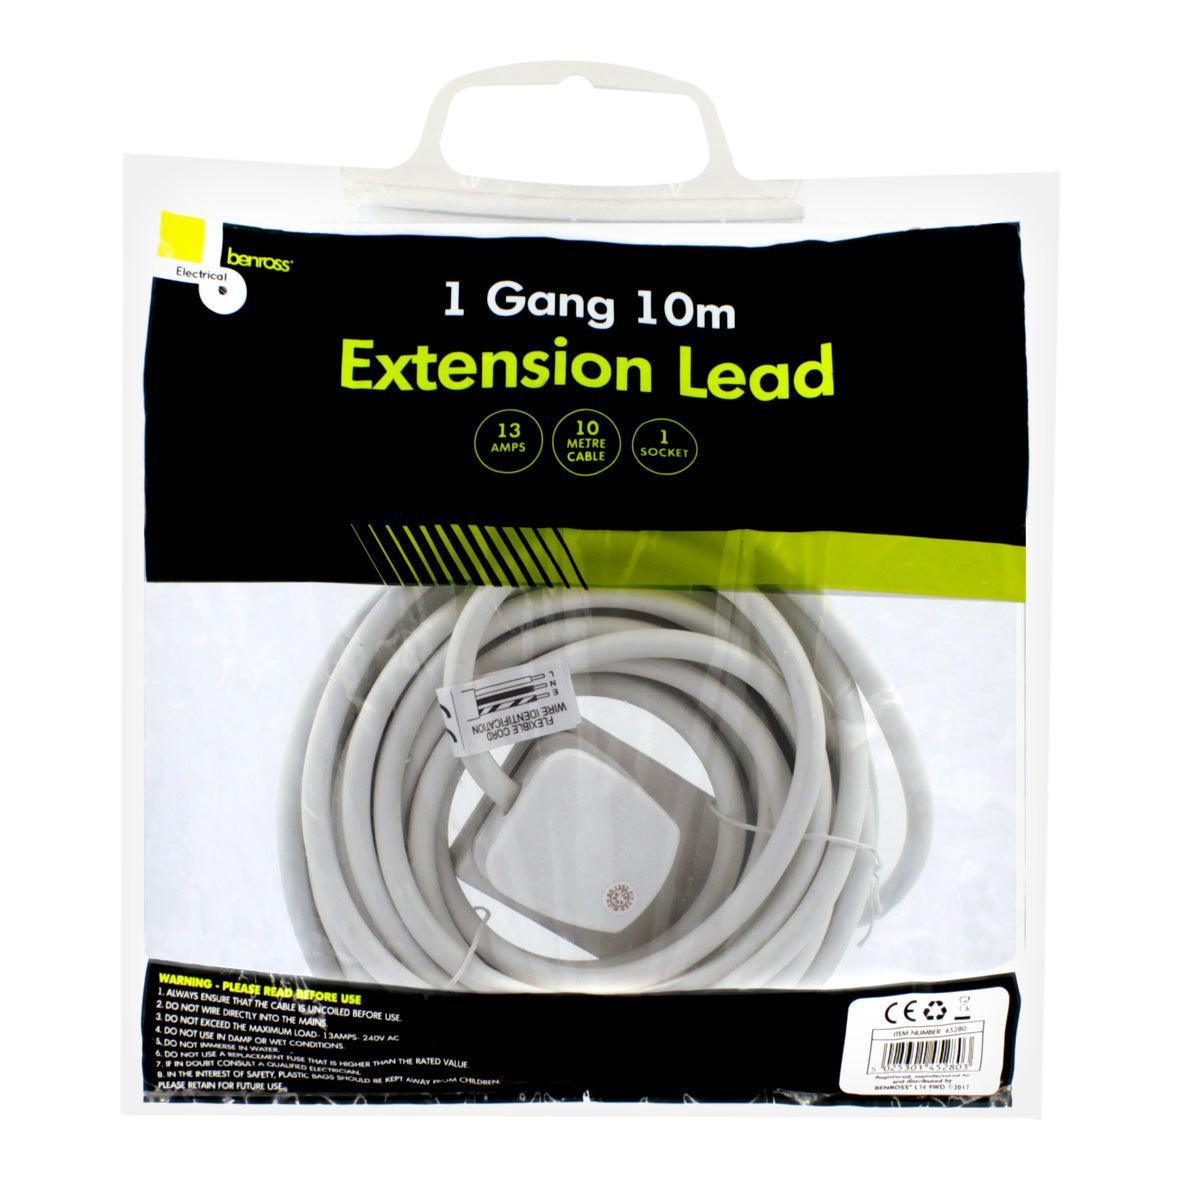 Benross 1 Gang 10m Extension Lead - Choice Stores